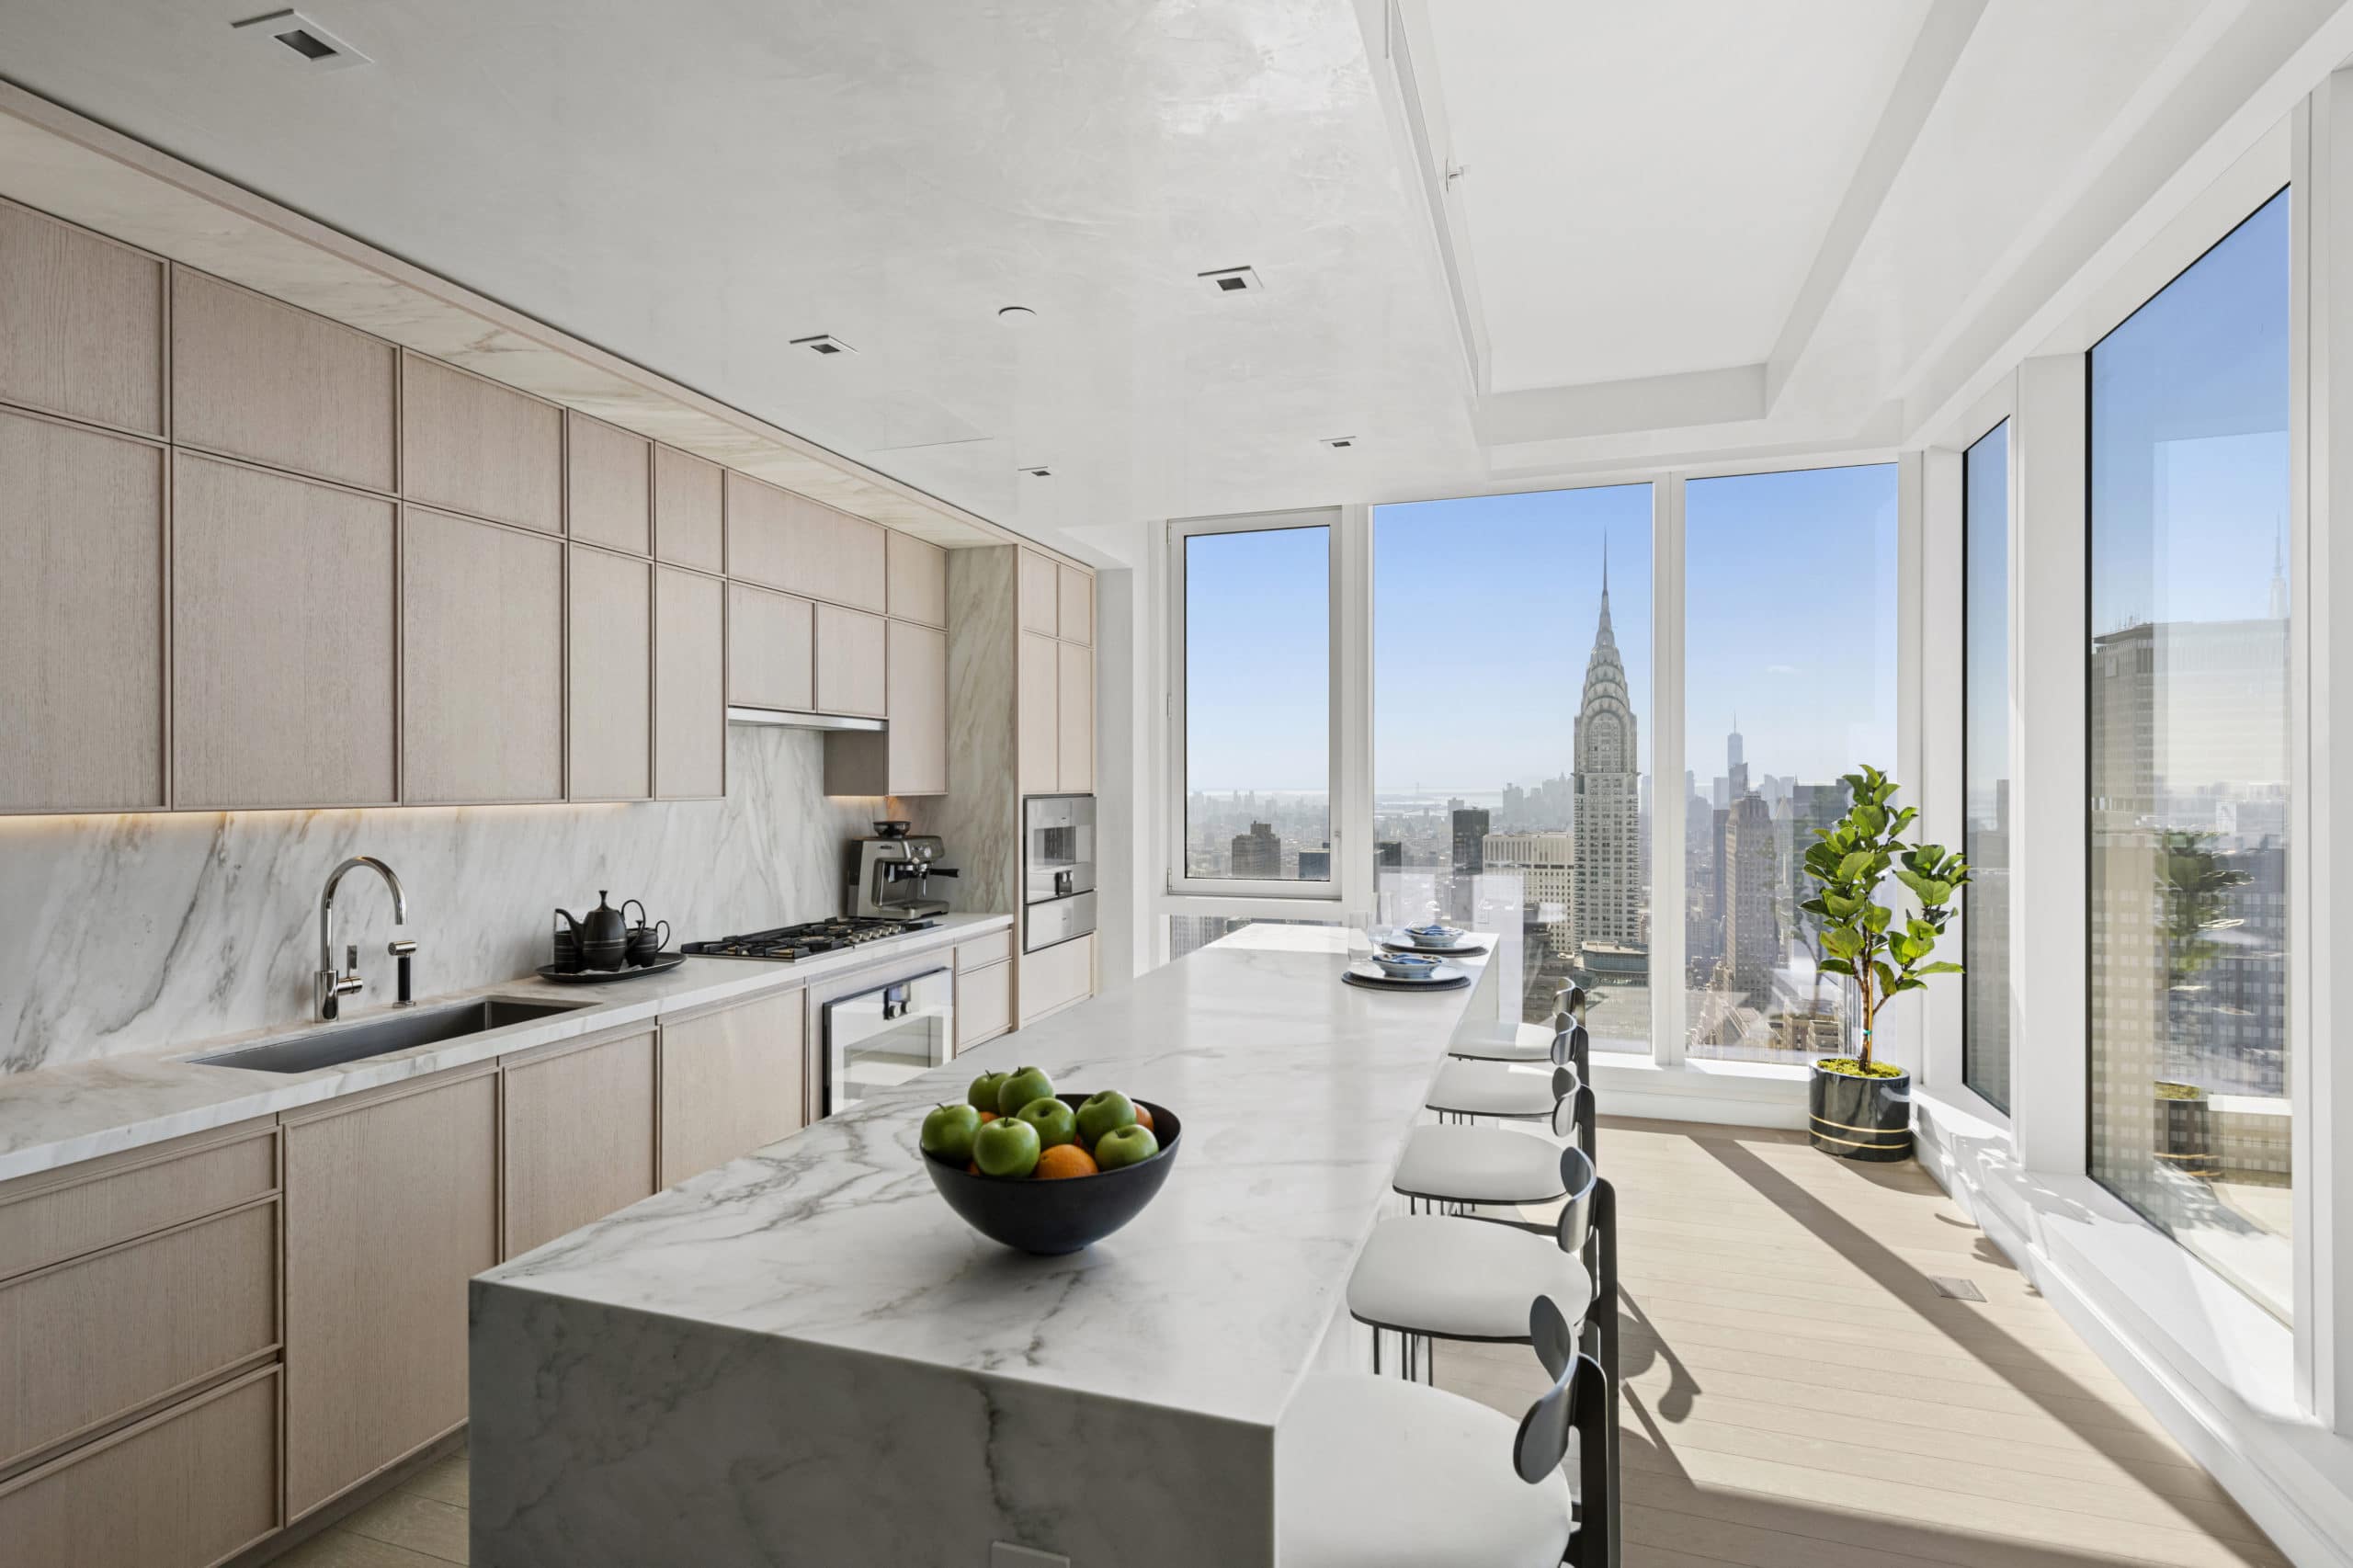 Kitchen in The Centrale condos in NYC. Tan cabinets, white marble countertops, a long island and chairs with city views.